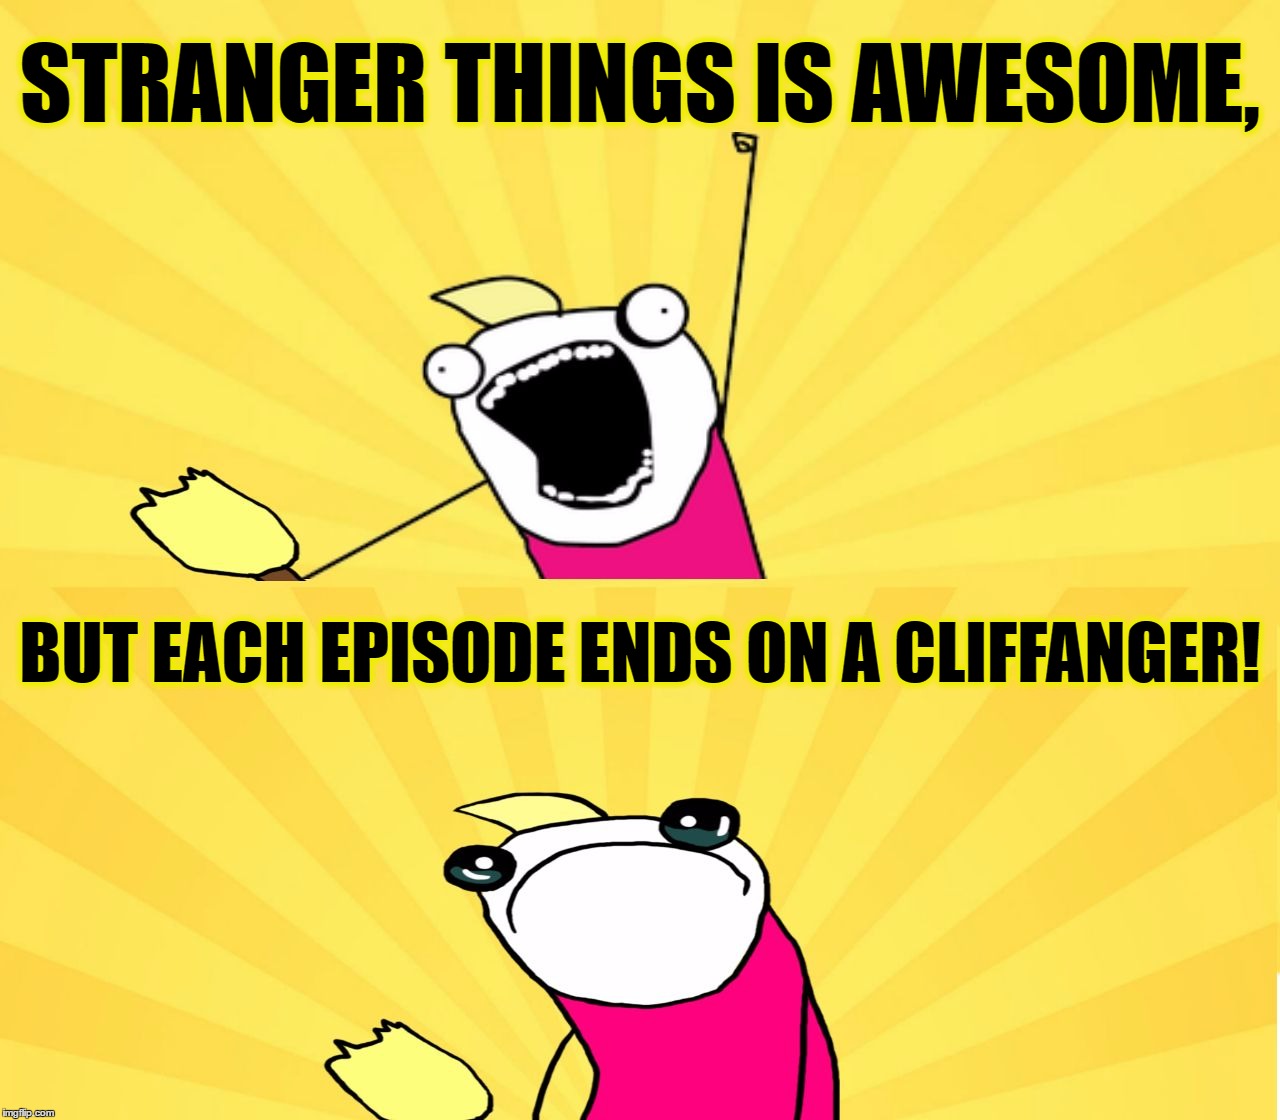 Well, I Heard From Family And Friends That I Should Watch This. I Just Binged Four Episodes Straight! | STRANGER THINGS IS AWESOME, BUT EACH EPISODE ENDS ON A CLIFFANGER! | image tagged in x all the y even bother,stranger things,cliffhanger,funny,netflix,memes | made w/ Imgflip meme maker